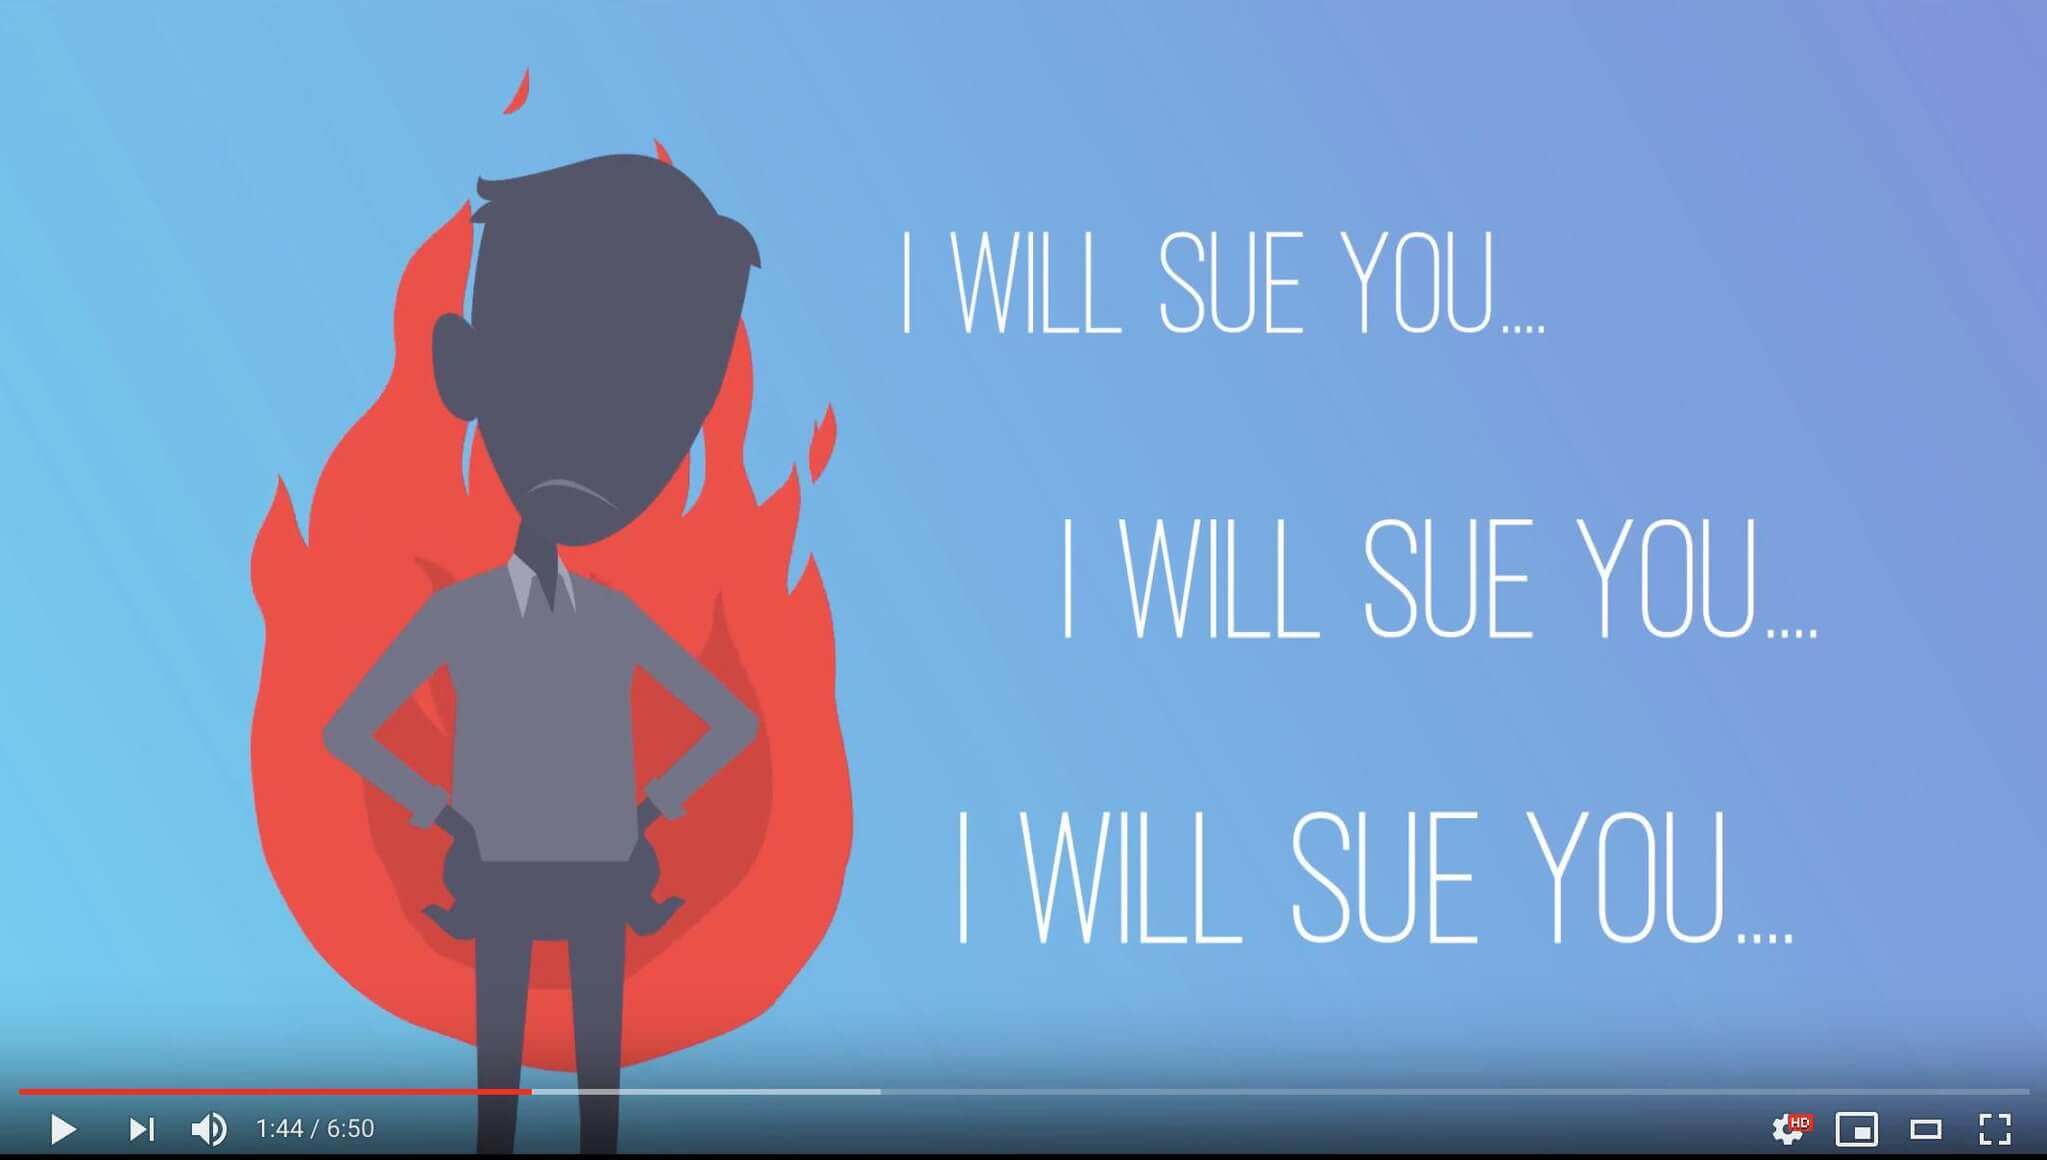 YouTube video (without captions) screenshot of cartoon person with disabilities in flames (hell?) with "I WILL SUE YOU..." repeated 3 times.